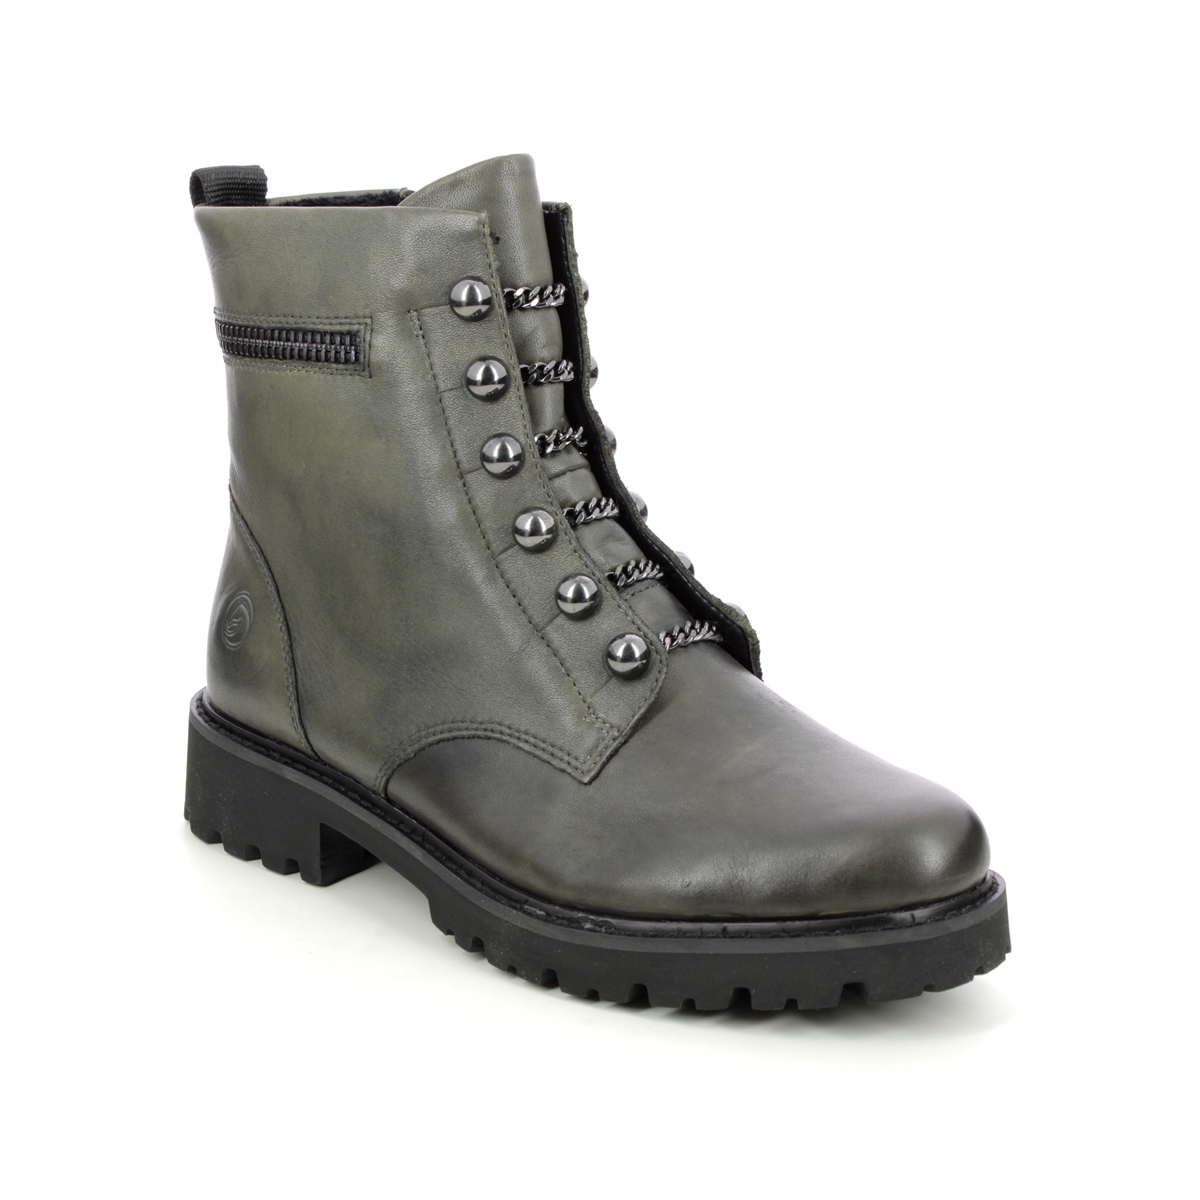 Remonte Docland Olive Leather Womens Biker Boots D8670-52 In Size 38 In Plain Olive Leather